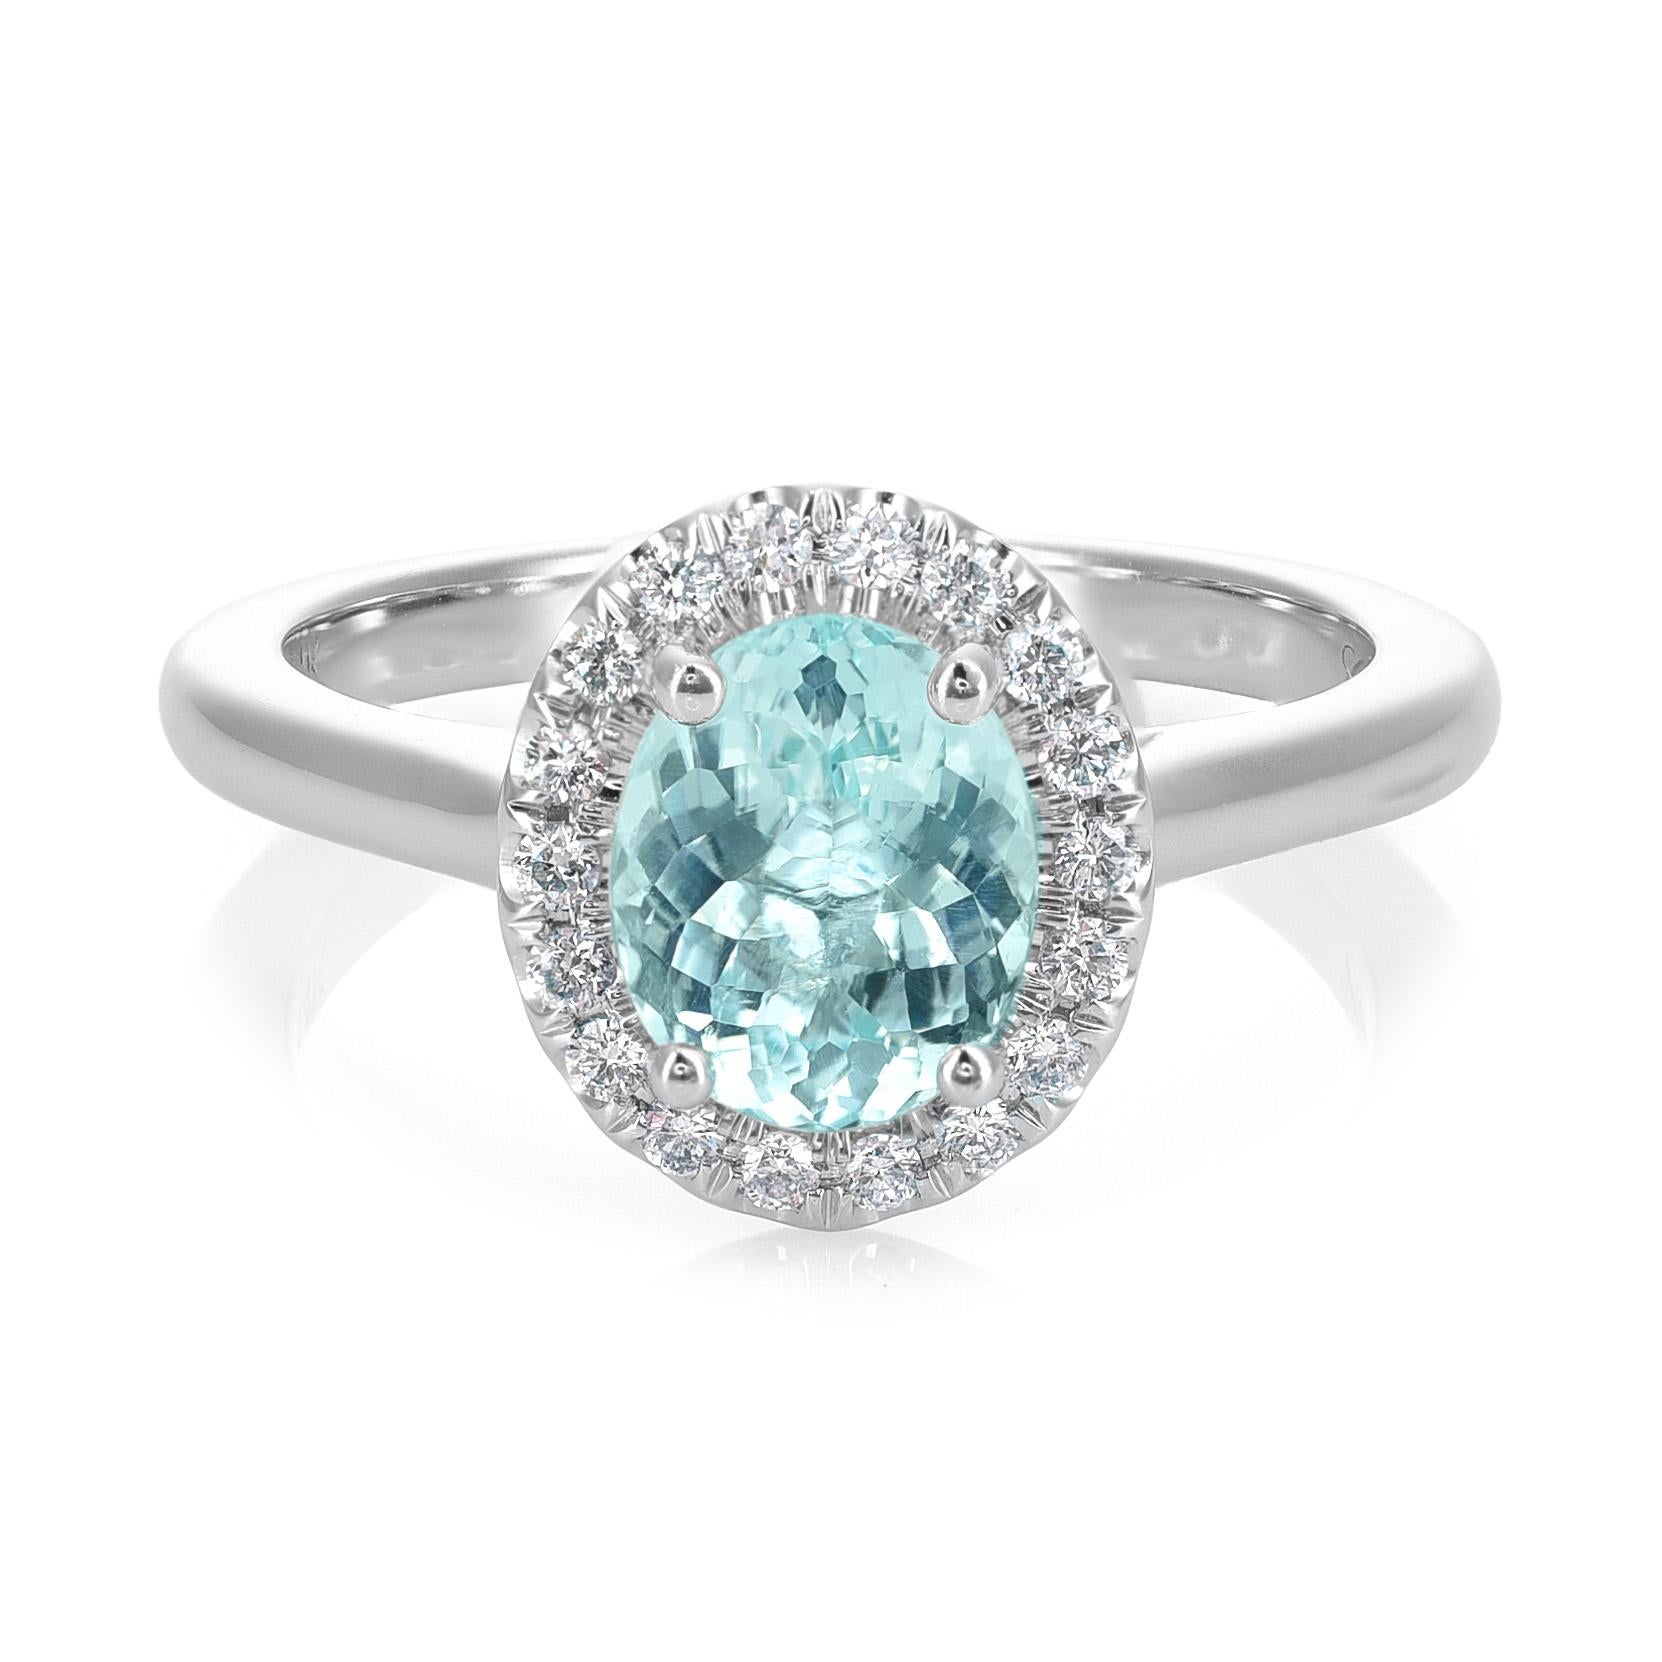 1.29 Carats Paraiba Tourmaline Diamonds set in 14K White Gold Ring In New Condition For Sale In Los Angeles, CA